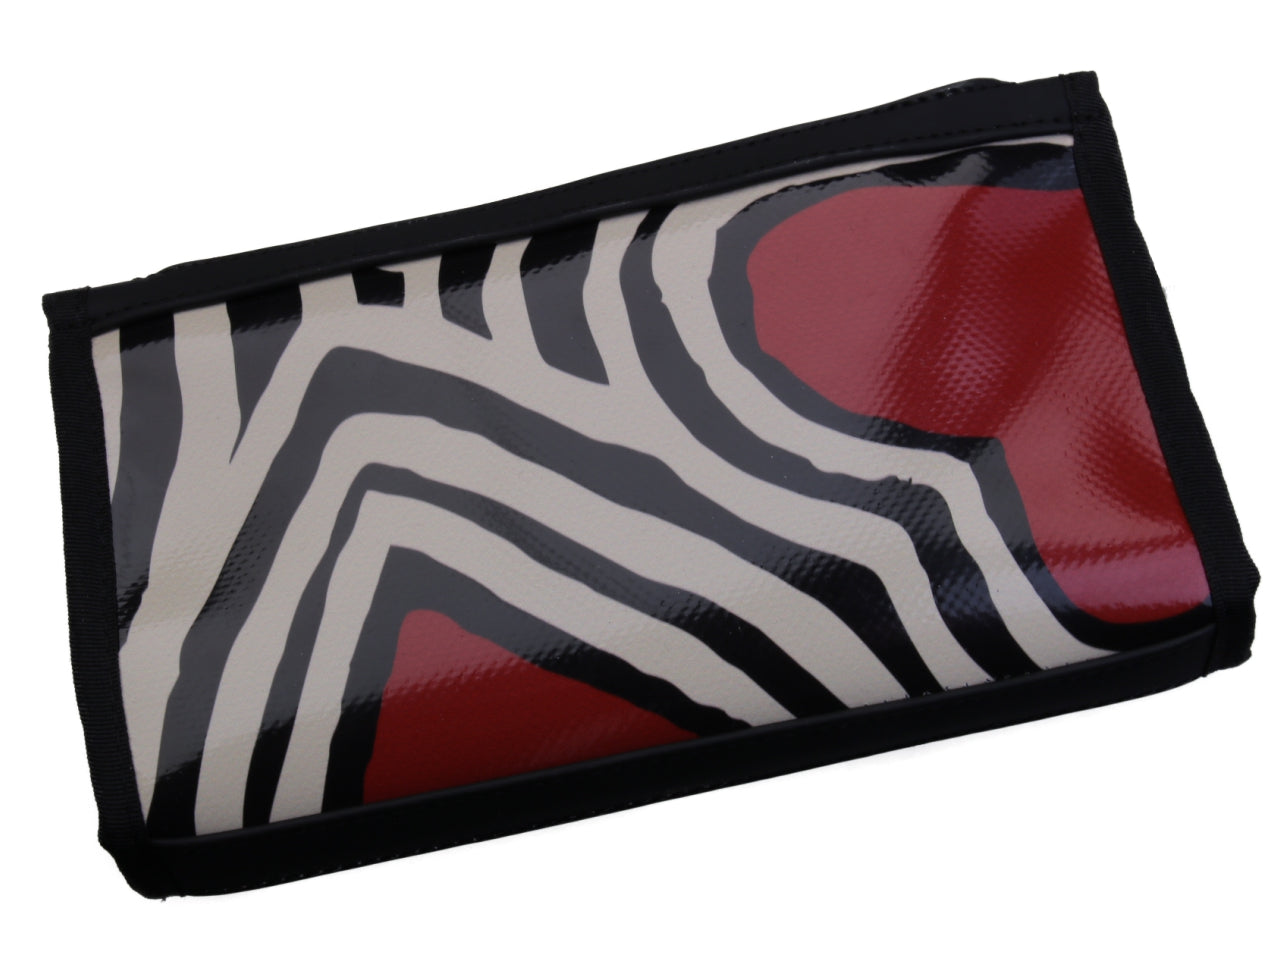 LARGE WOMEN'S WALLET BEIGE BLACK "HEARTS". MODEL PIT MADE OF LORRY TARPAULIN. - Limited Edition Paul Meccanico